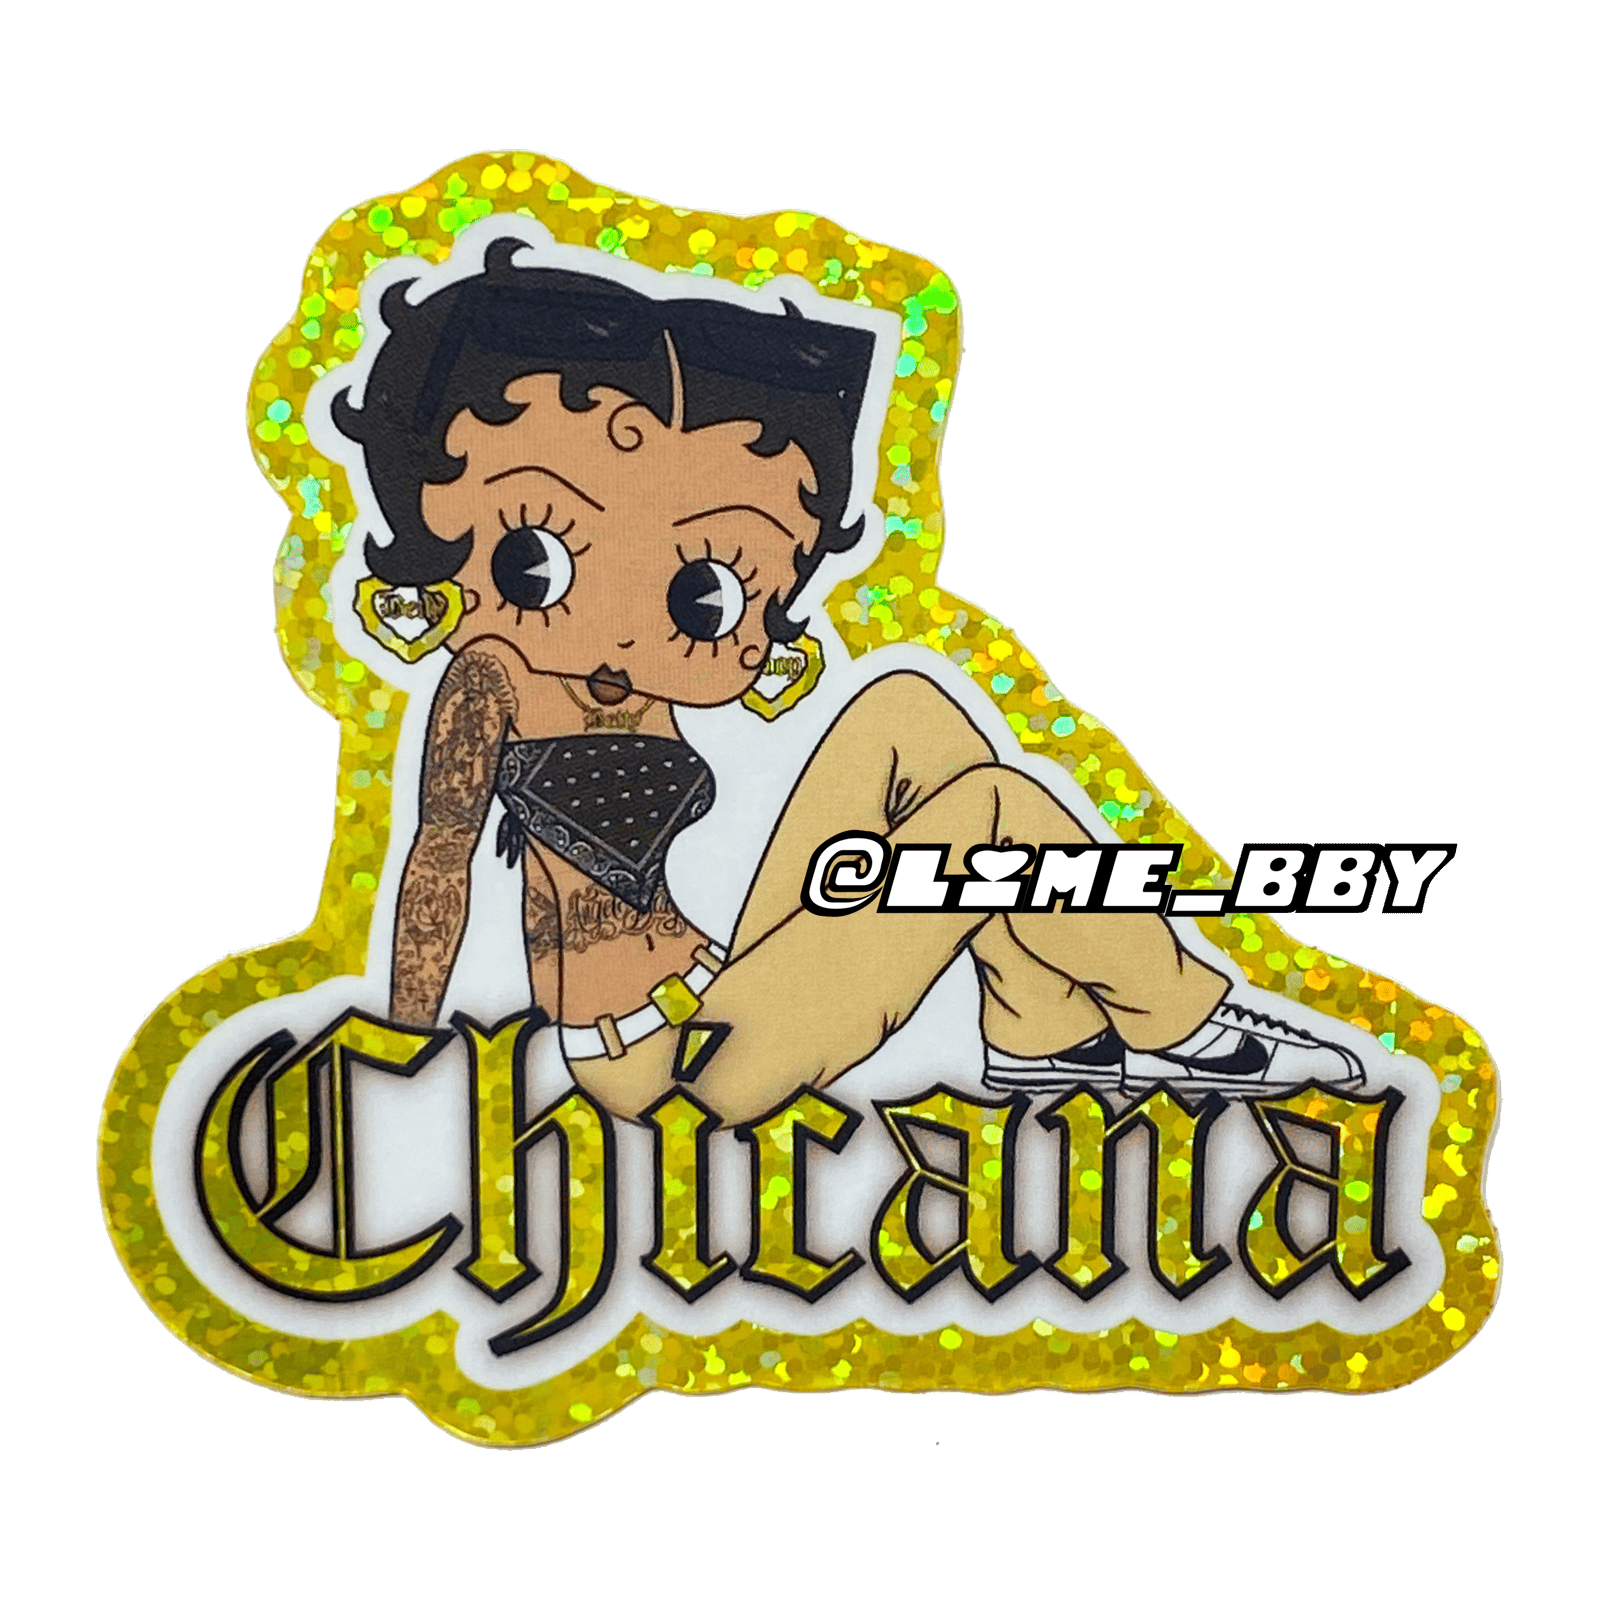 Betty Boop Pictures Archive  For more styles and sizes of FREE Betty Boop  Cell  Mobile Phone Wallpapers go to httpsglitterfillsblogspotcom  Cartoon winking Biker BettyBoop on her motorcycle Dimensions 750 x